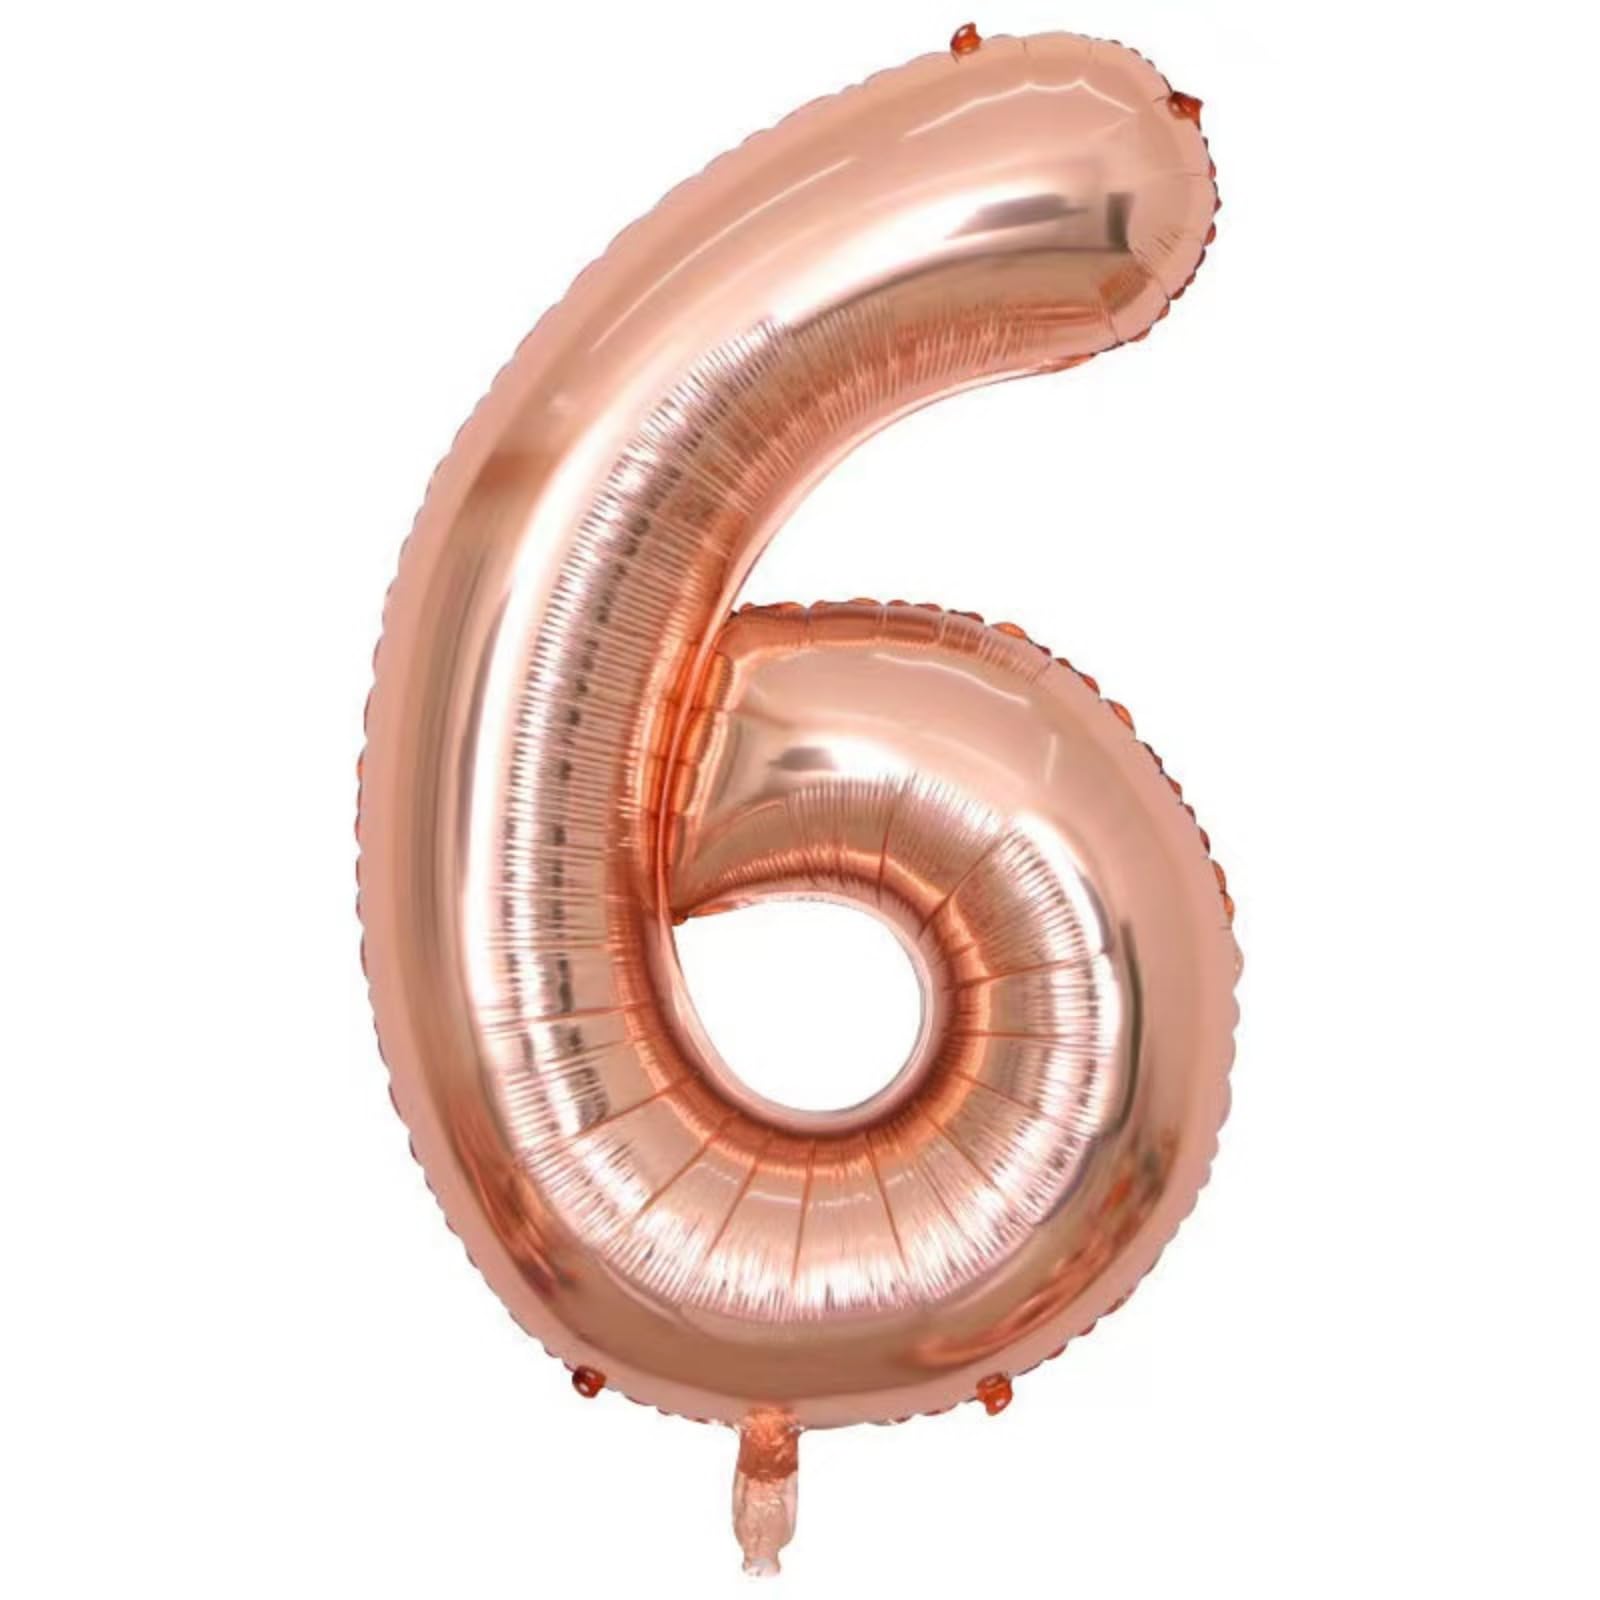 40 Inch Rose Gold Number 60 Balloons With Crown, 60th Birthday Balloons for Men and Women, 60th Birthday Decorations, Wedding Anniversar Celebration Decoration Balloons. (Rose Gold)